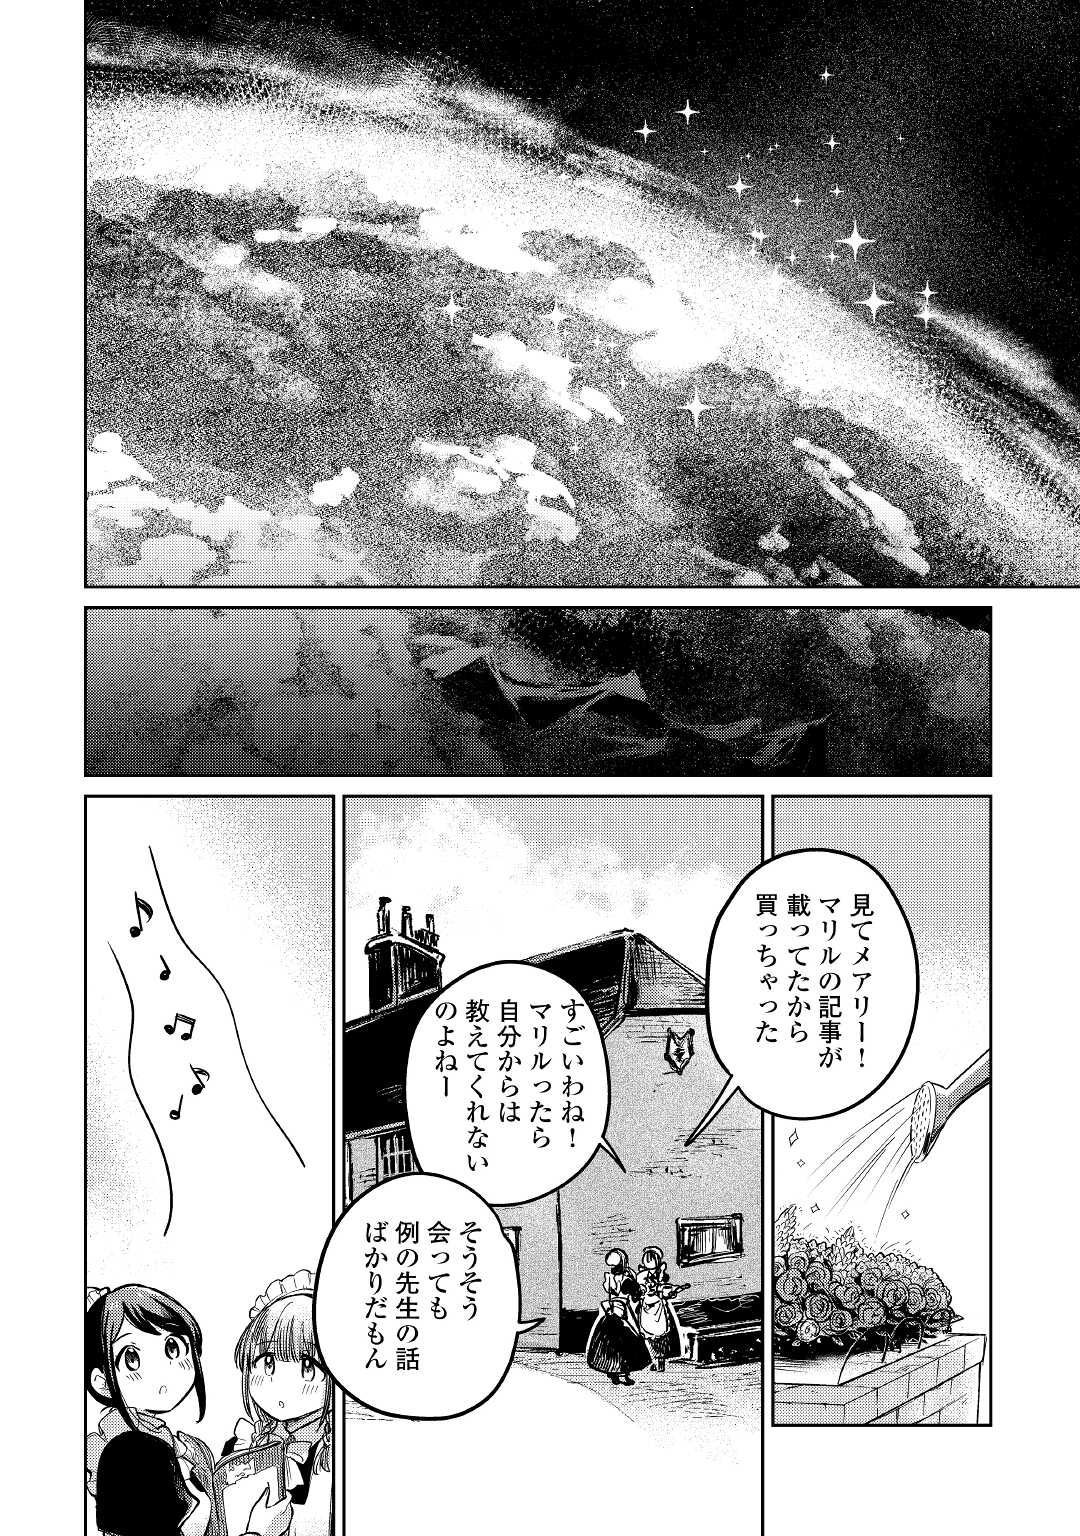 The Former Structural Researcher’s Story of Otherworldly Adventure 第40話 - Page 30